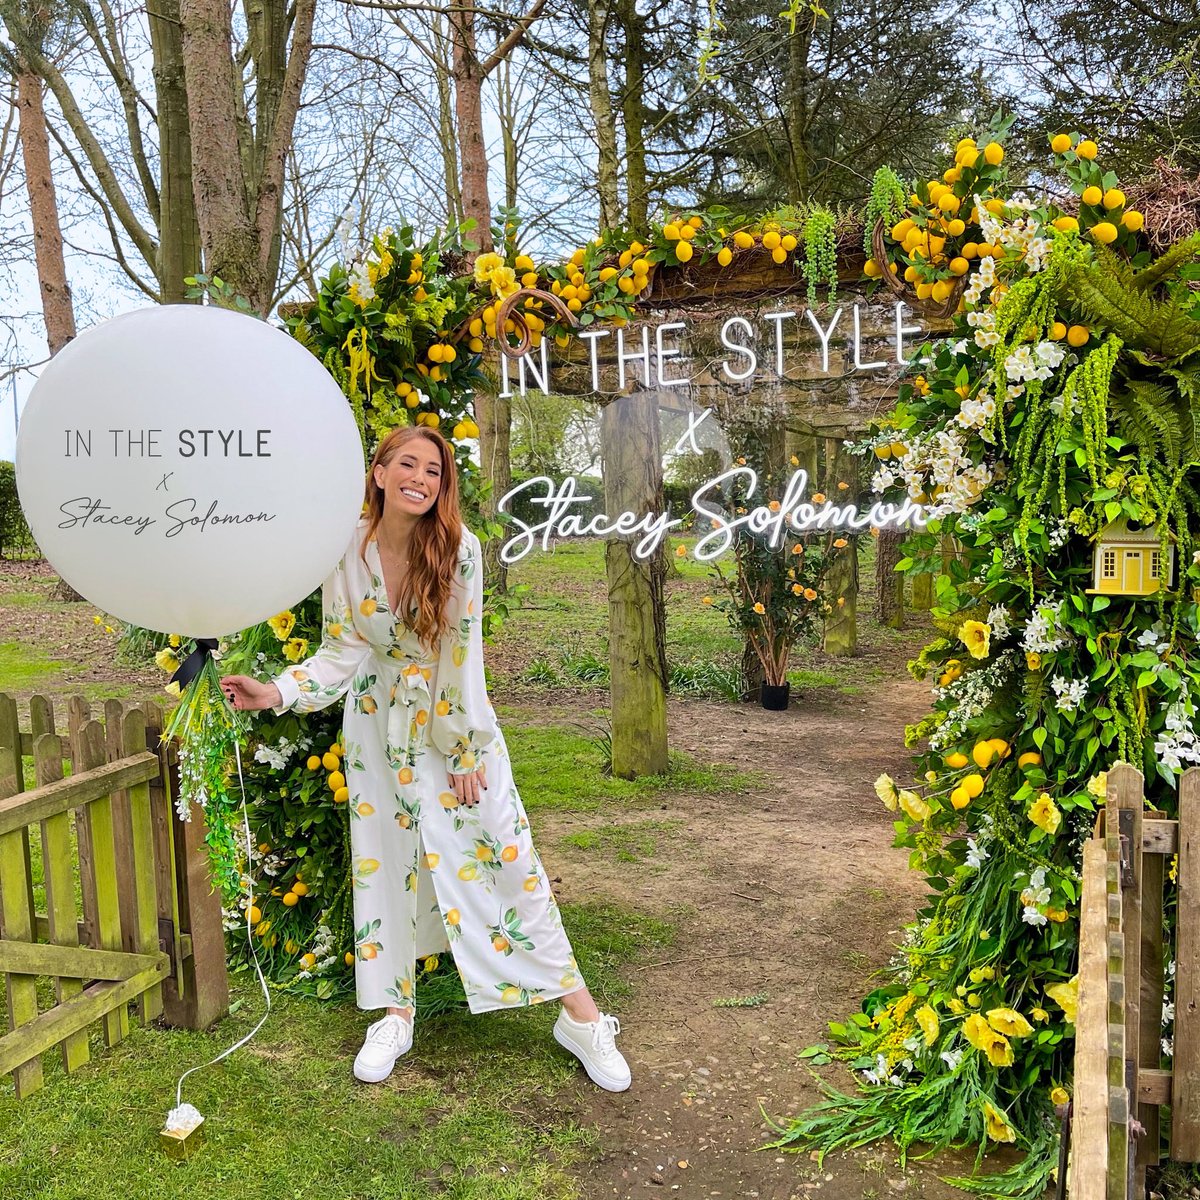 THE WAIT IS OVER ‼️ Introducing ... In The Style x @StaceySolomon 💚🍋 Launching 27.04.2021 ✨This is something YOU guys have been requesting for SO long and it’s finally happening!😍 To celebrate, we’re also giving you 𝟒𝟎% 𝐎𝐅𝐅 𝐄𝐕𝐄𝐑𝐘𝐓𝐇𝐈𝐍𝐆 🎉Head to the app to shop!